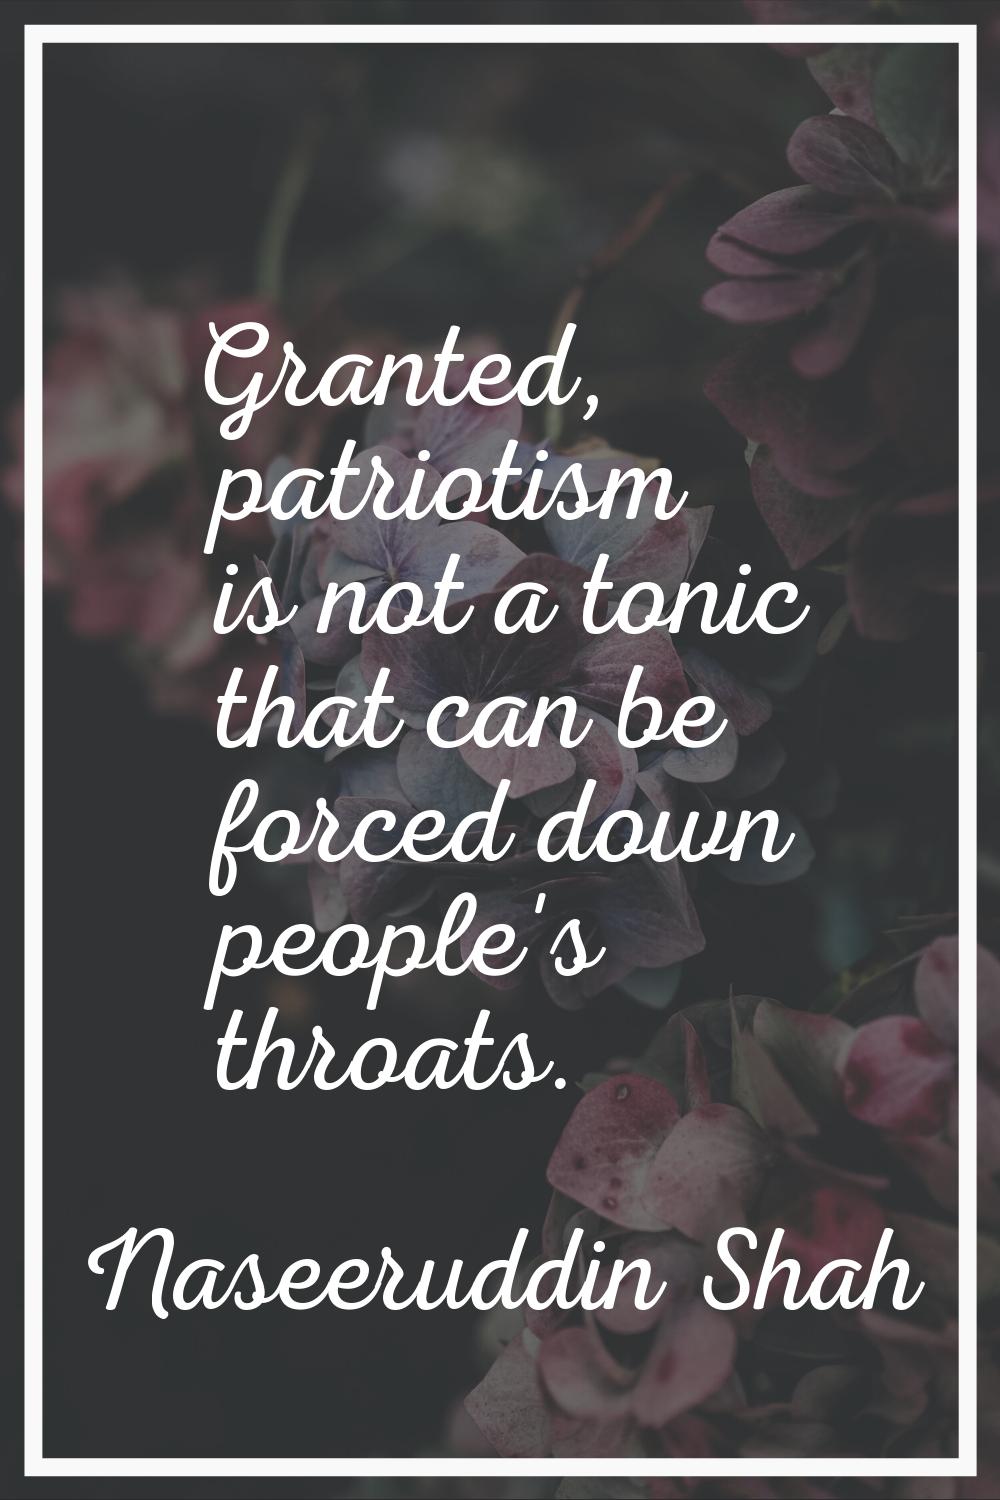 Granted, patriotism is not a tonic that can be forced down people's throats.